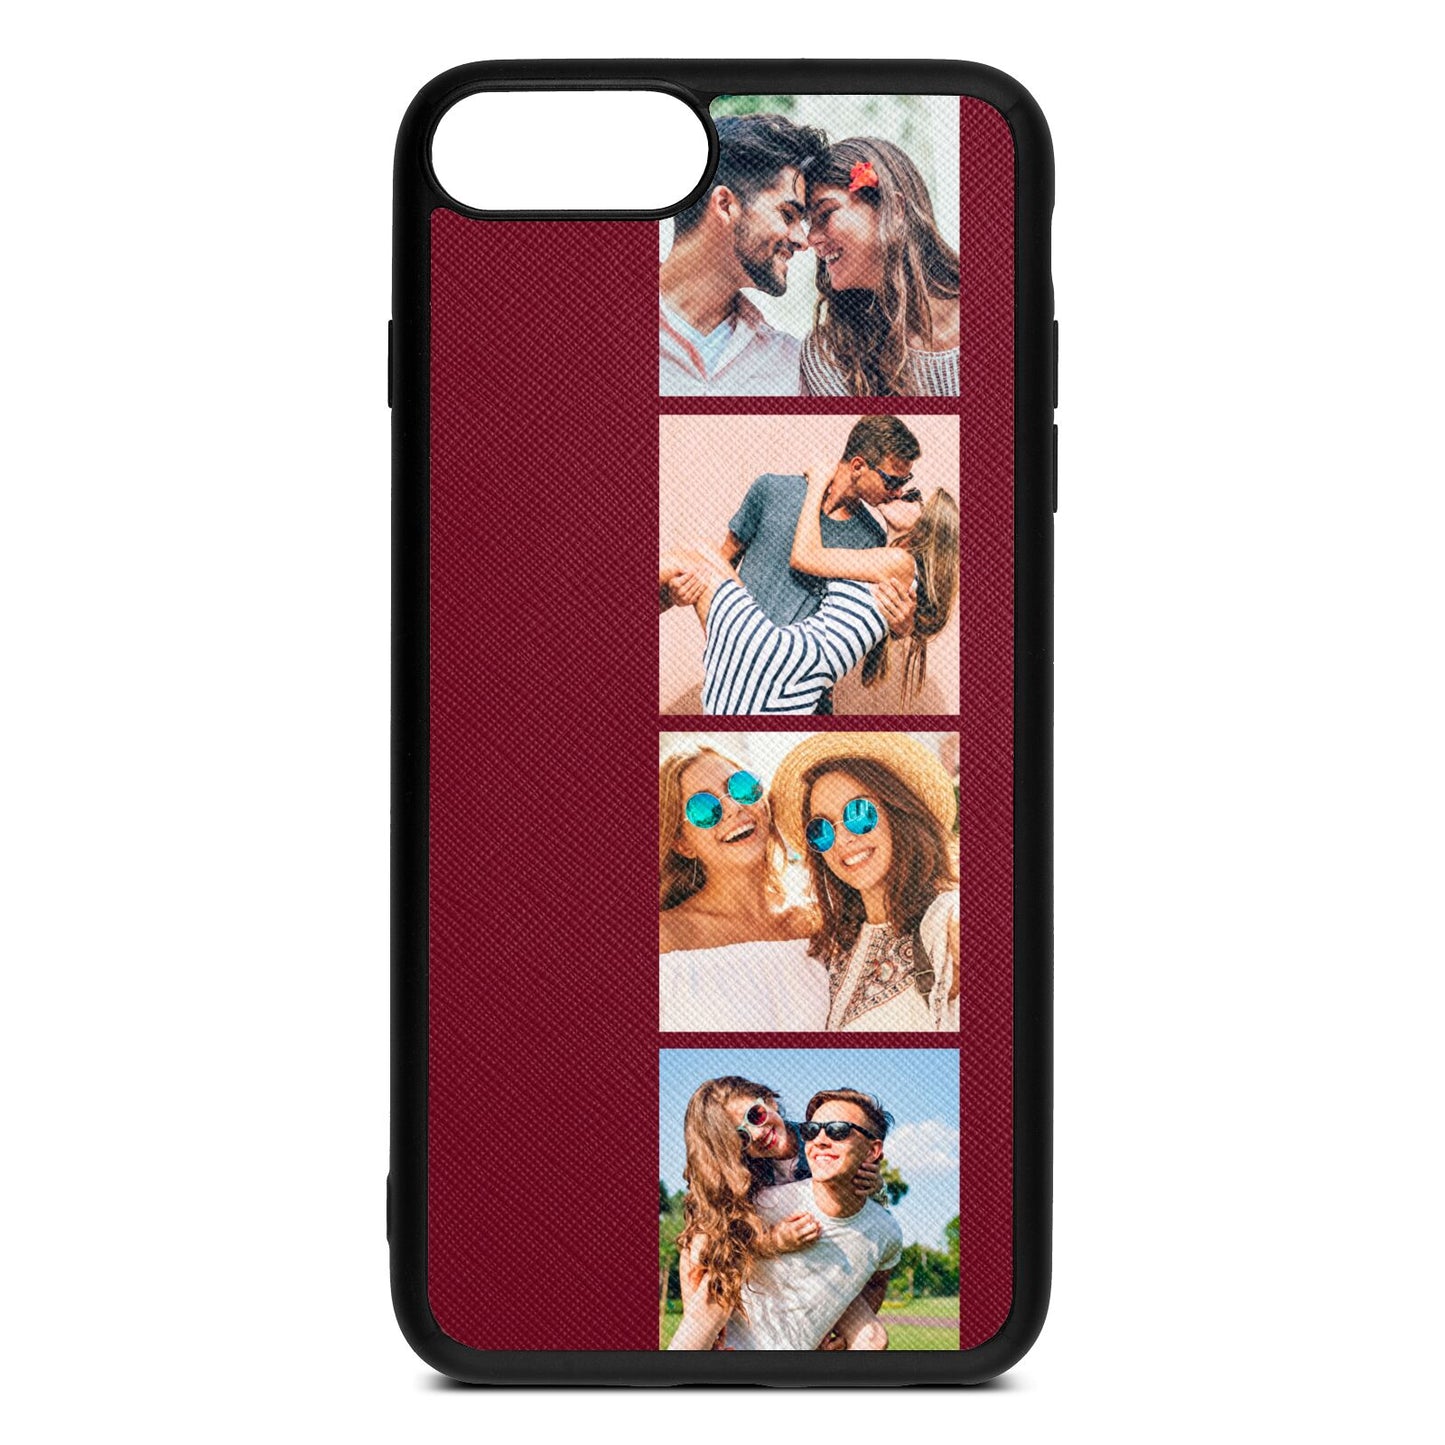 Photo Strip Montage Upload Wine Red Saffiano Leather iPhone 8 Plus Case